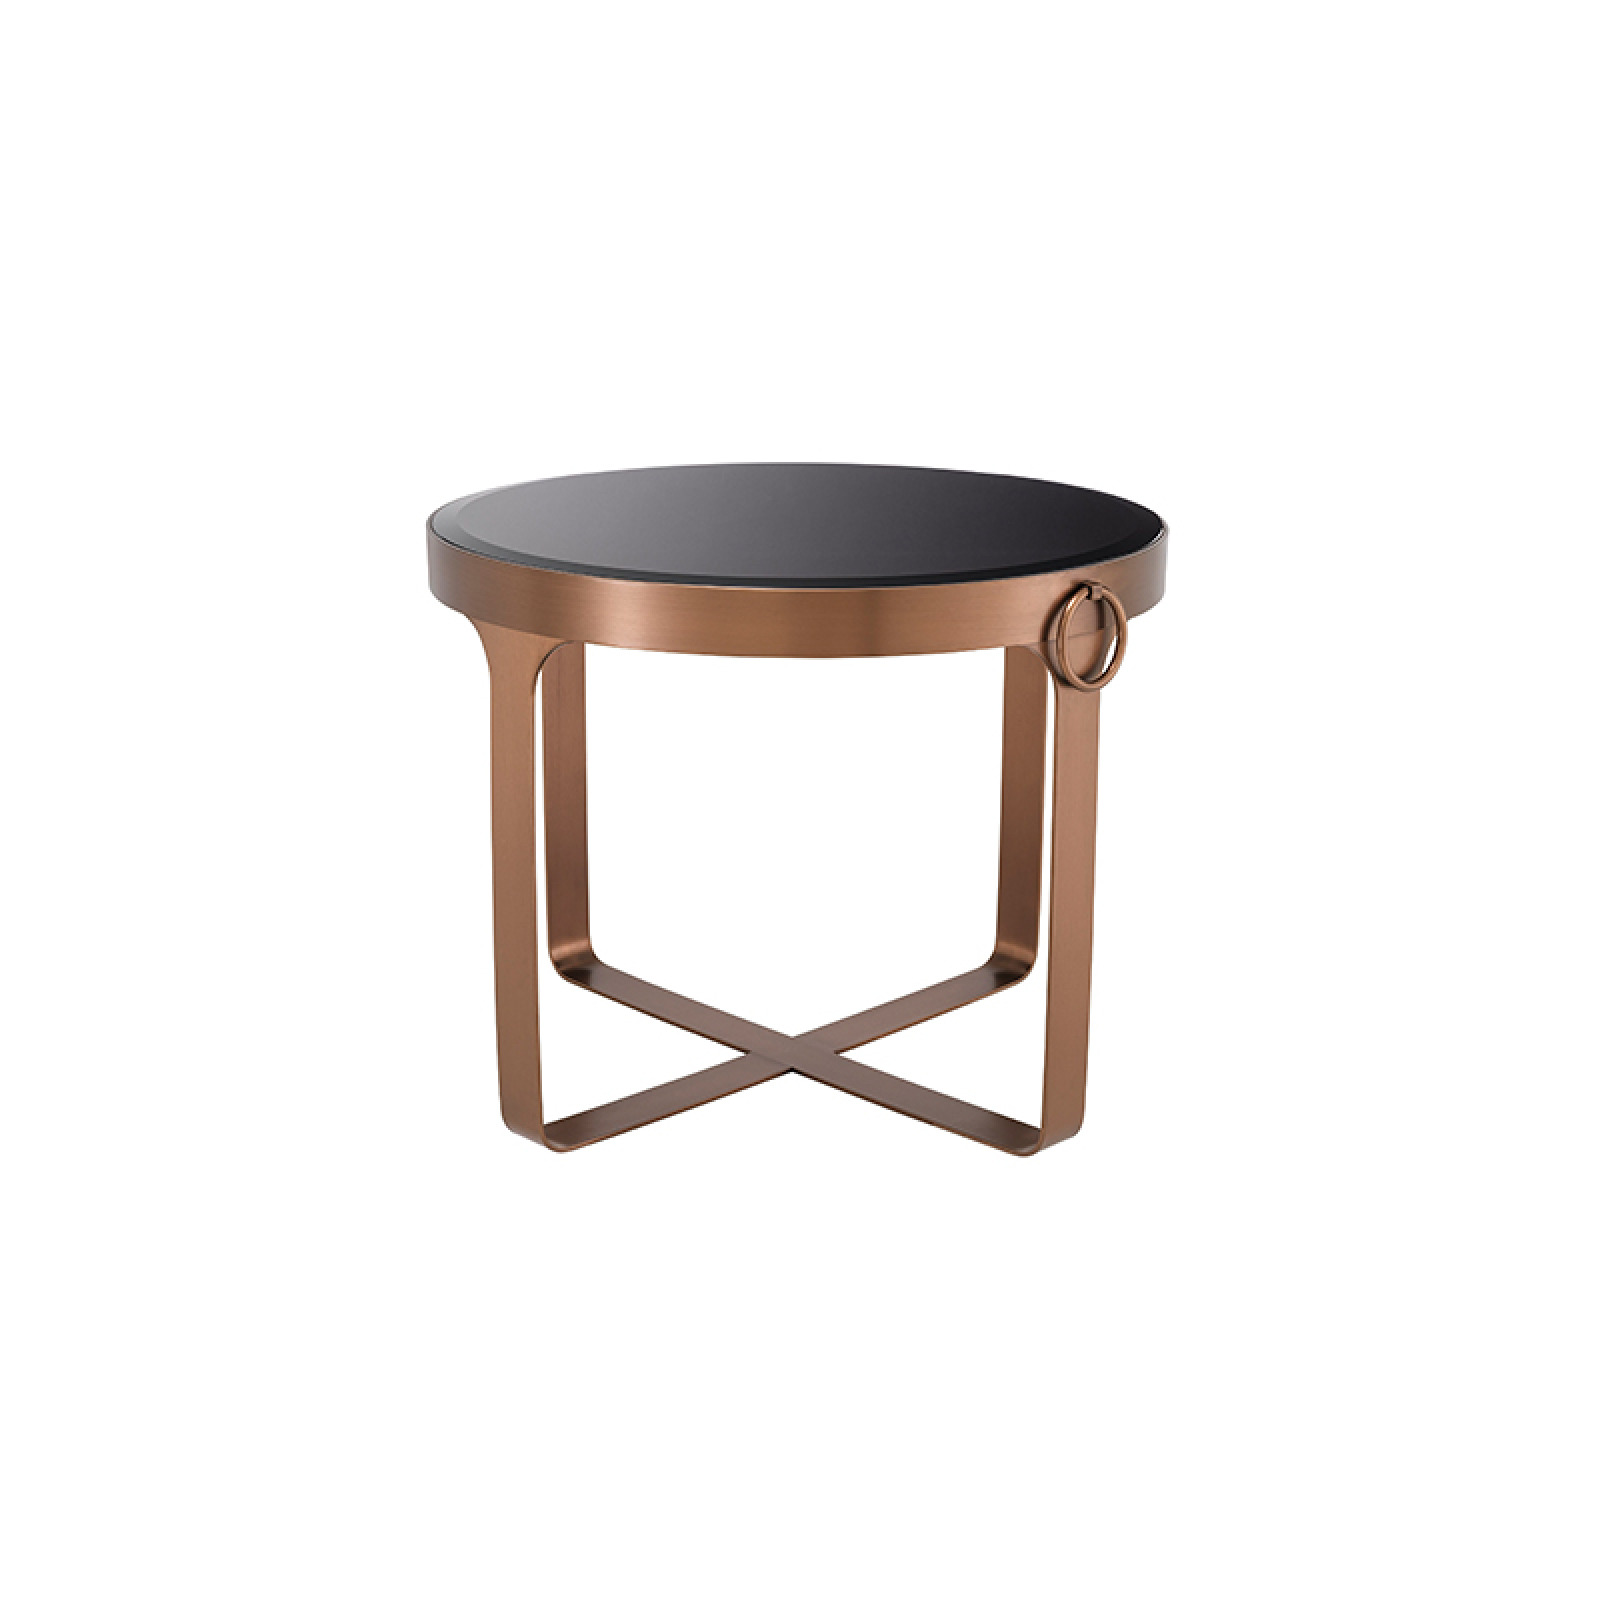 Clooney side table